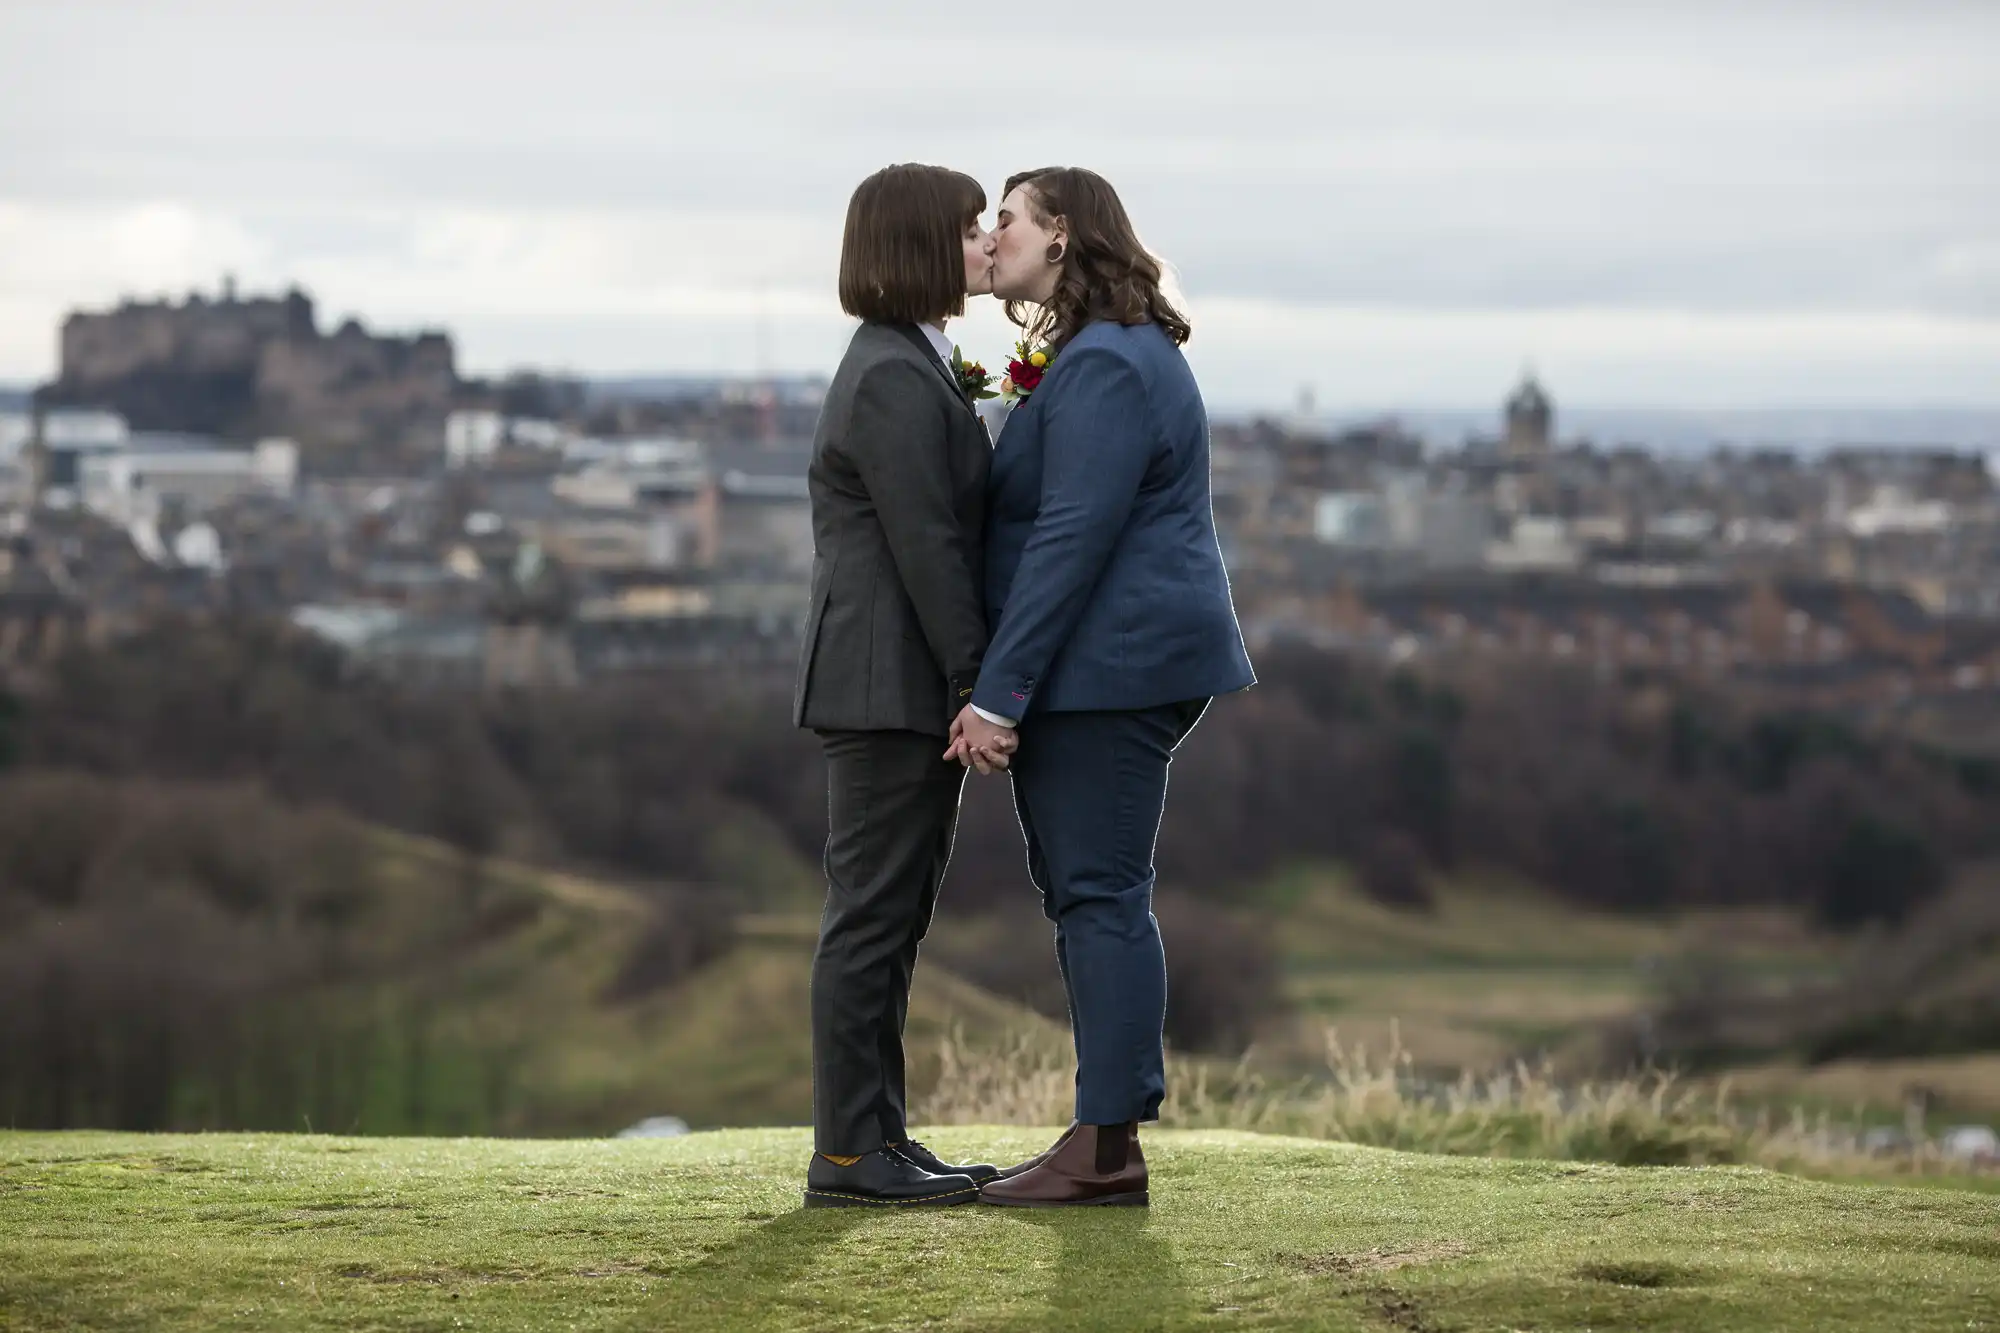 Two individuals in suits share a kiss while holding hands on a grassy hill, with a cityscape and a castle visible in the background.